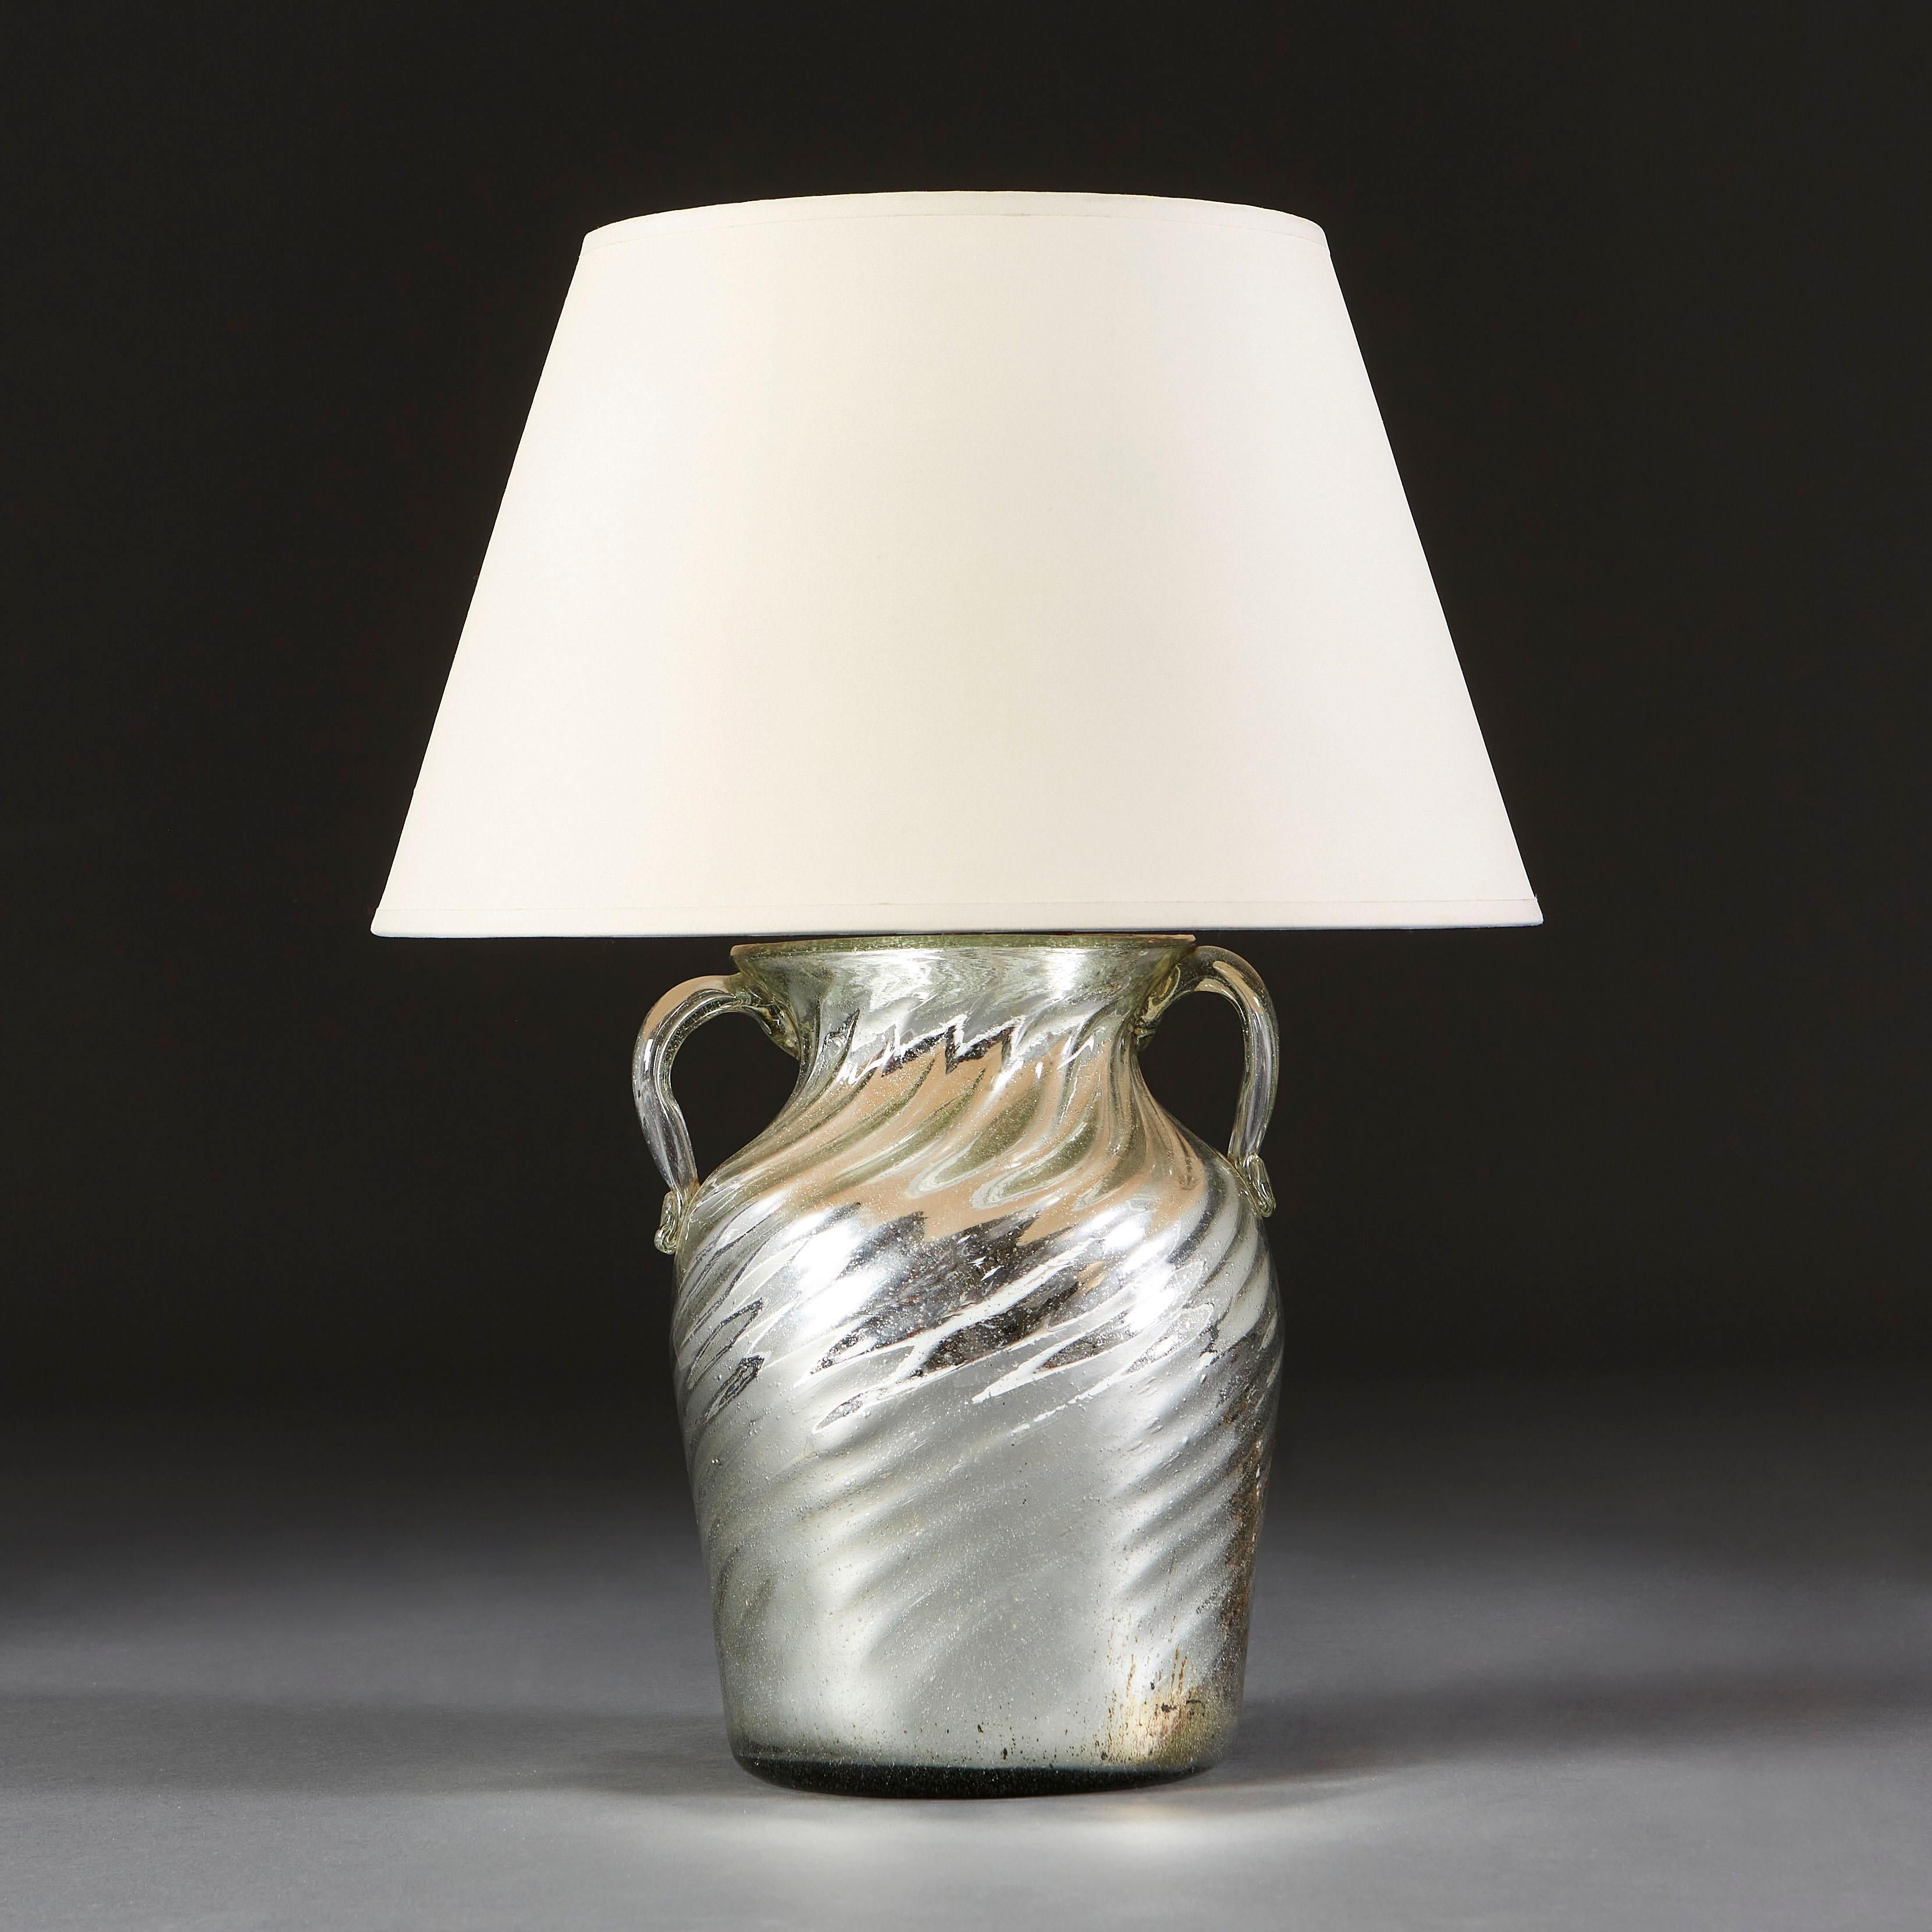 A mercury glass vessel, with a twisted body and flared neck, decorated with two handles, now as a lamp.

Currently wired for the UK. 

Please note: Lampshade not included.